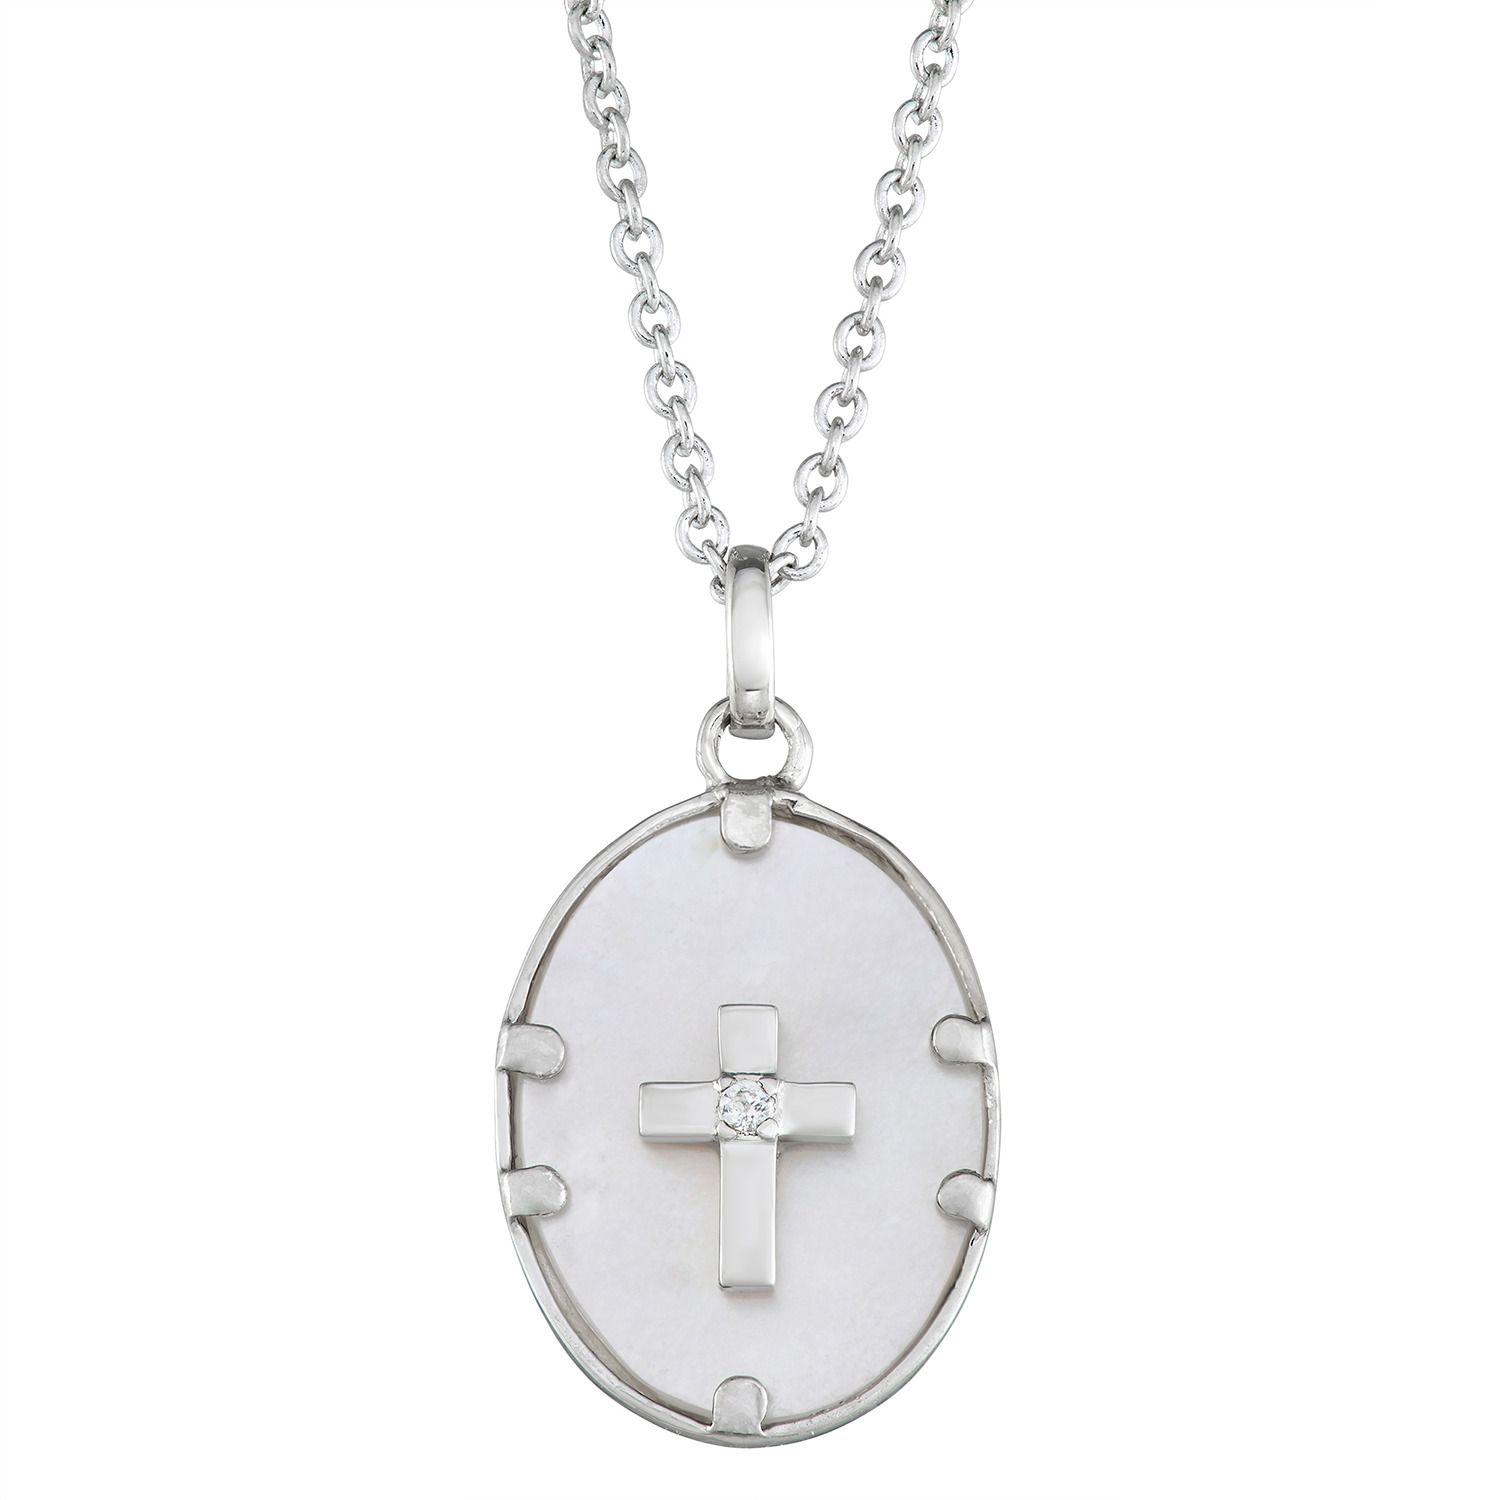 Image for Harper Stone Silver Plated Cross Cubic Zirconia Pendant at Kohl's.